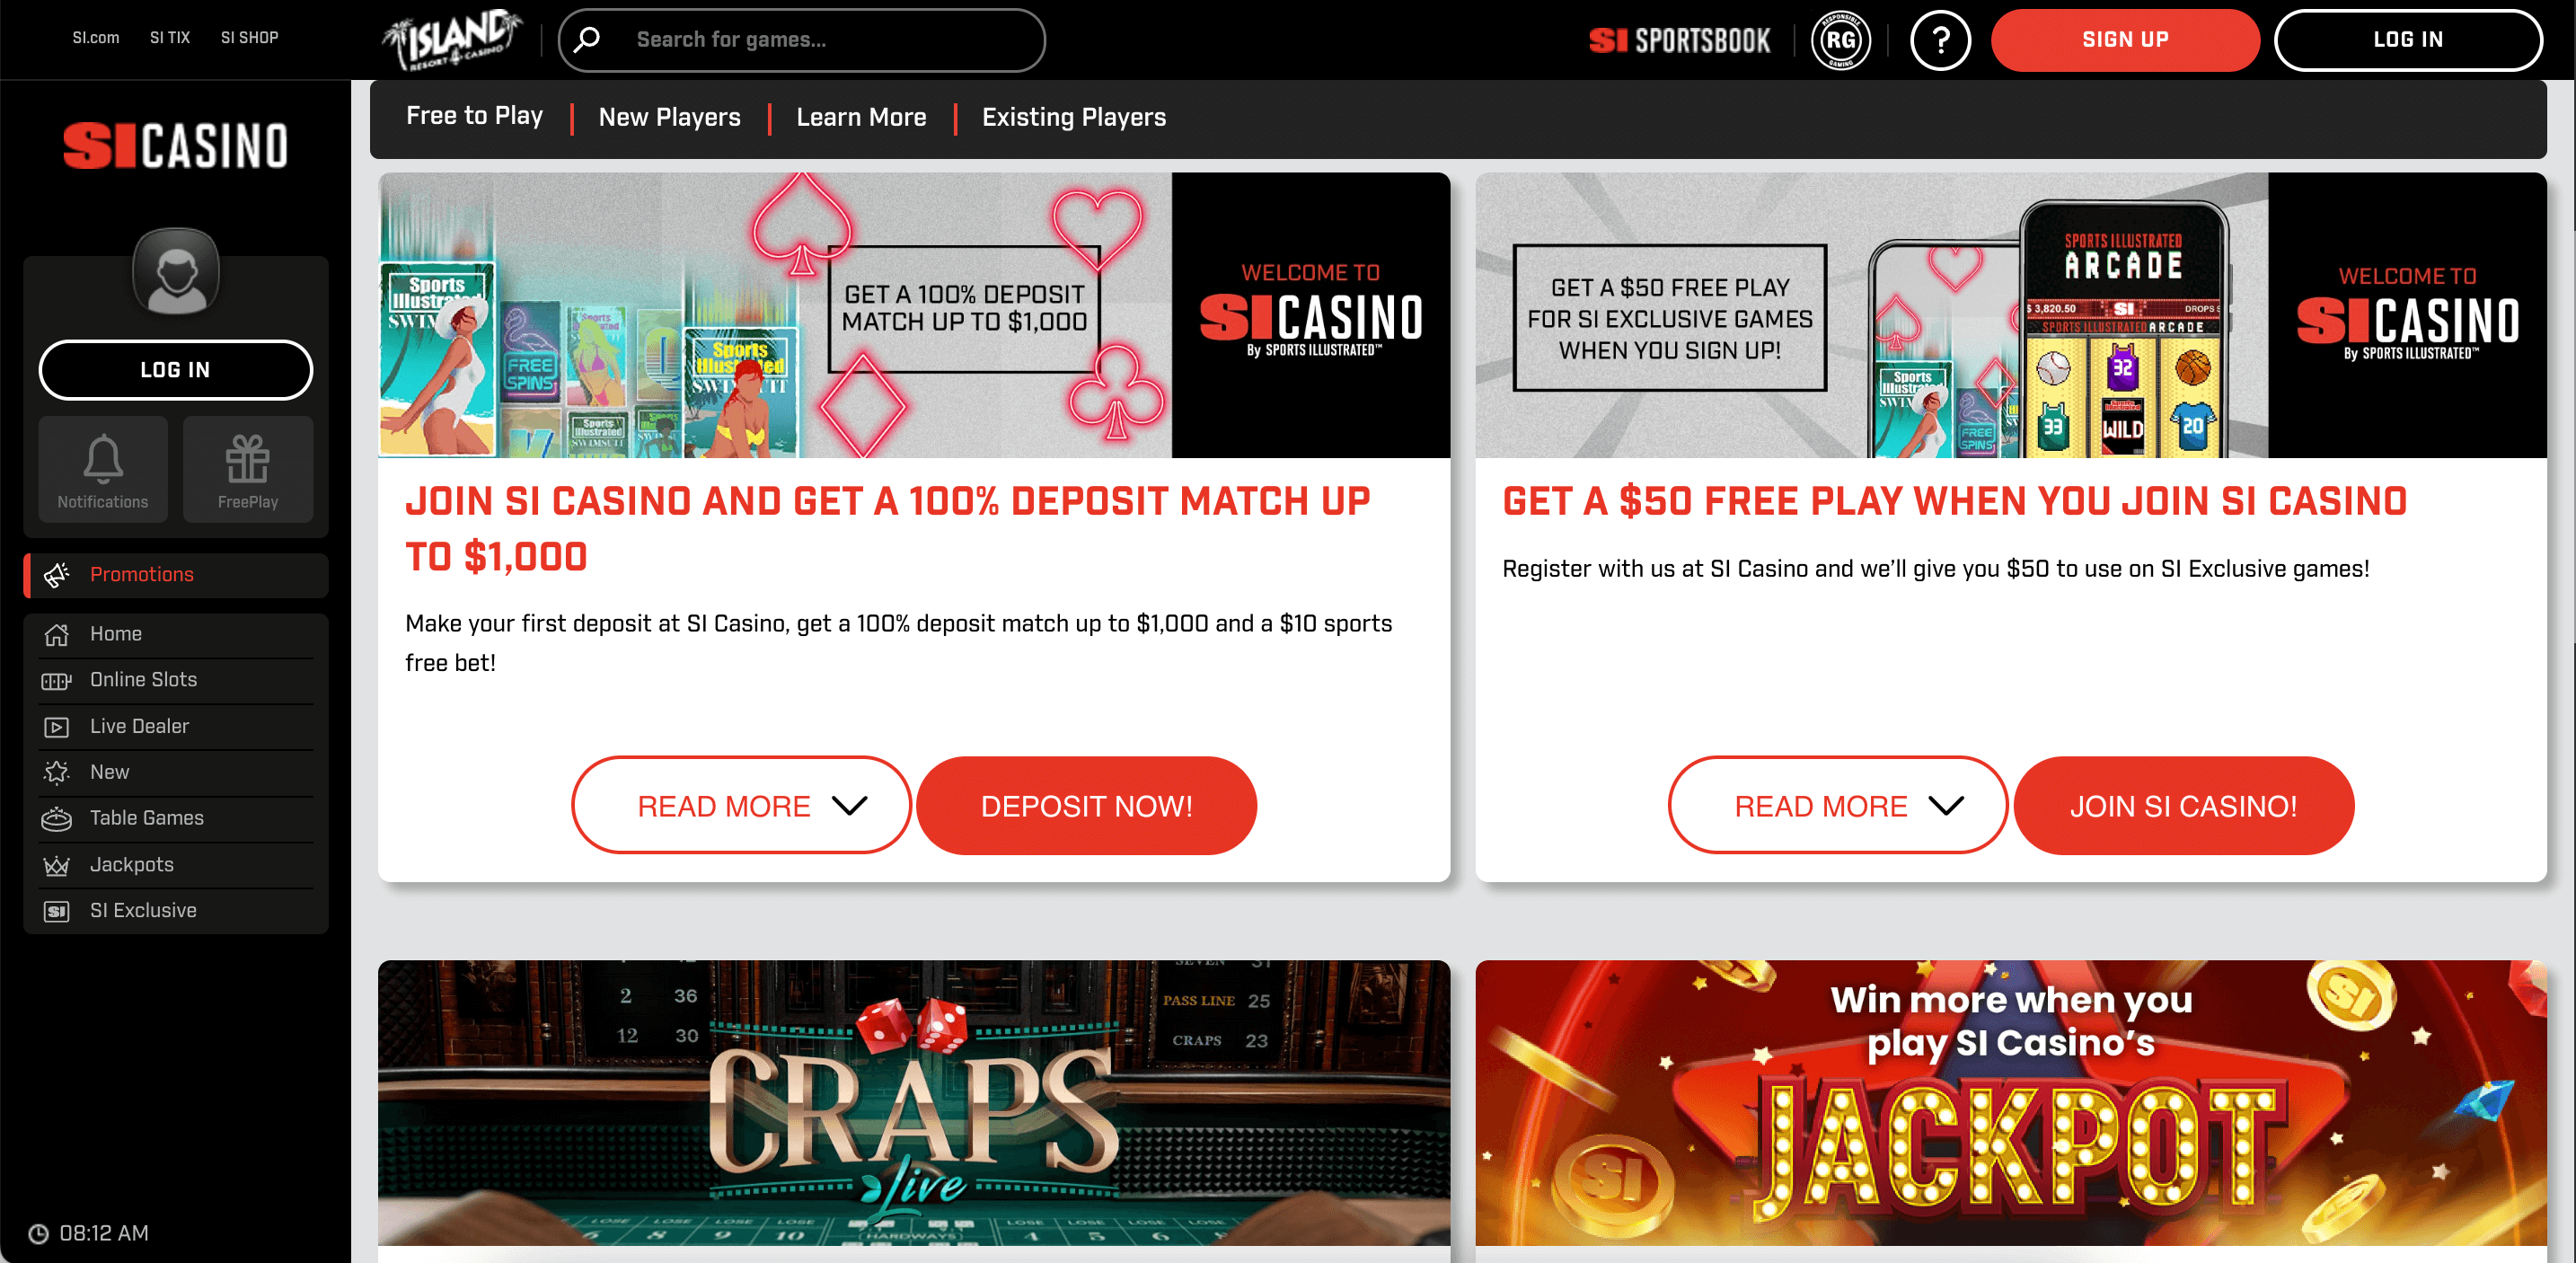 SI Casino Promotions